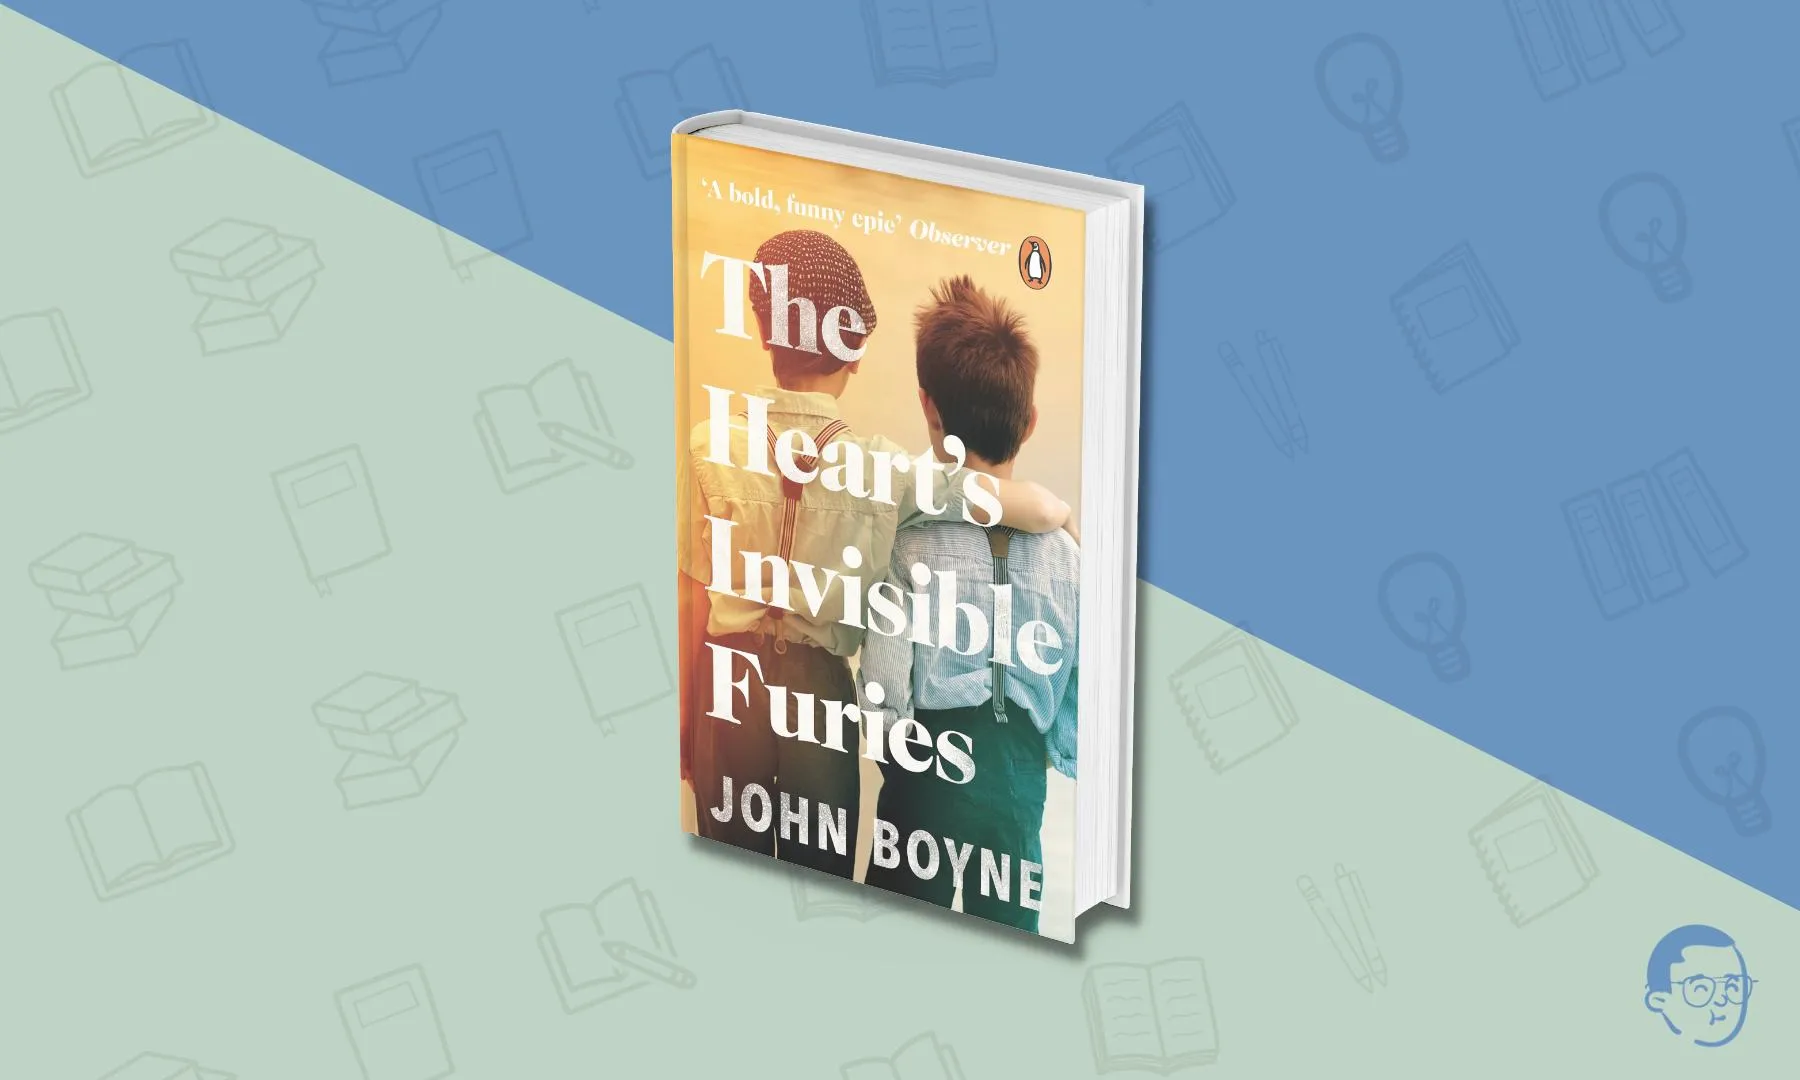 Books Like The Seven Husbands of Evelyn Hugo - The Hearts Invisible Furies by John Boyne